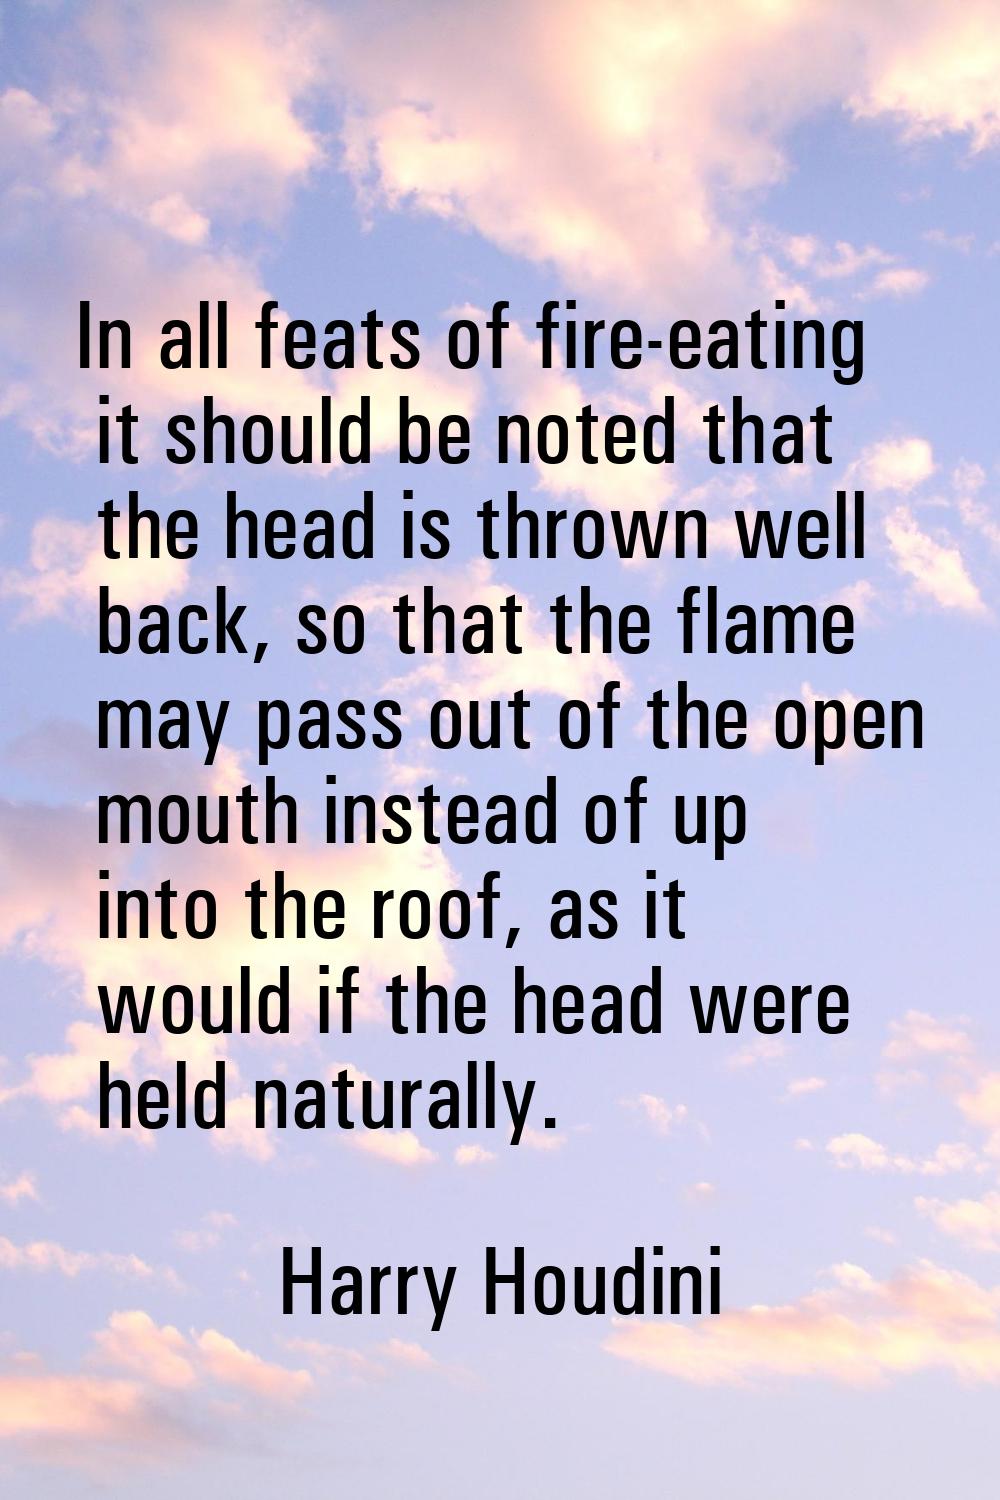 In all feats of fire-eating it should be noted that the head is thrown well back, so that the flame